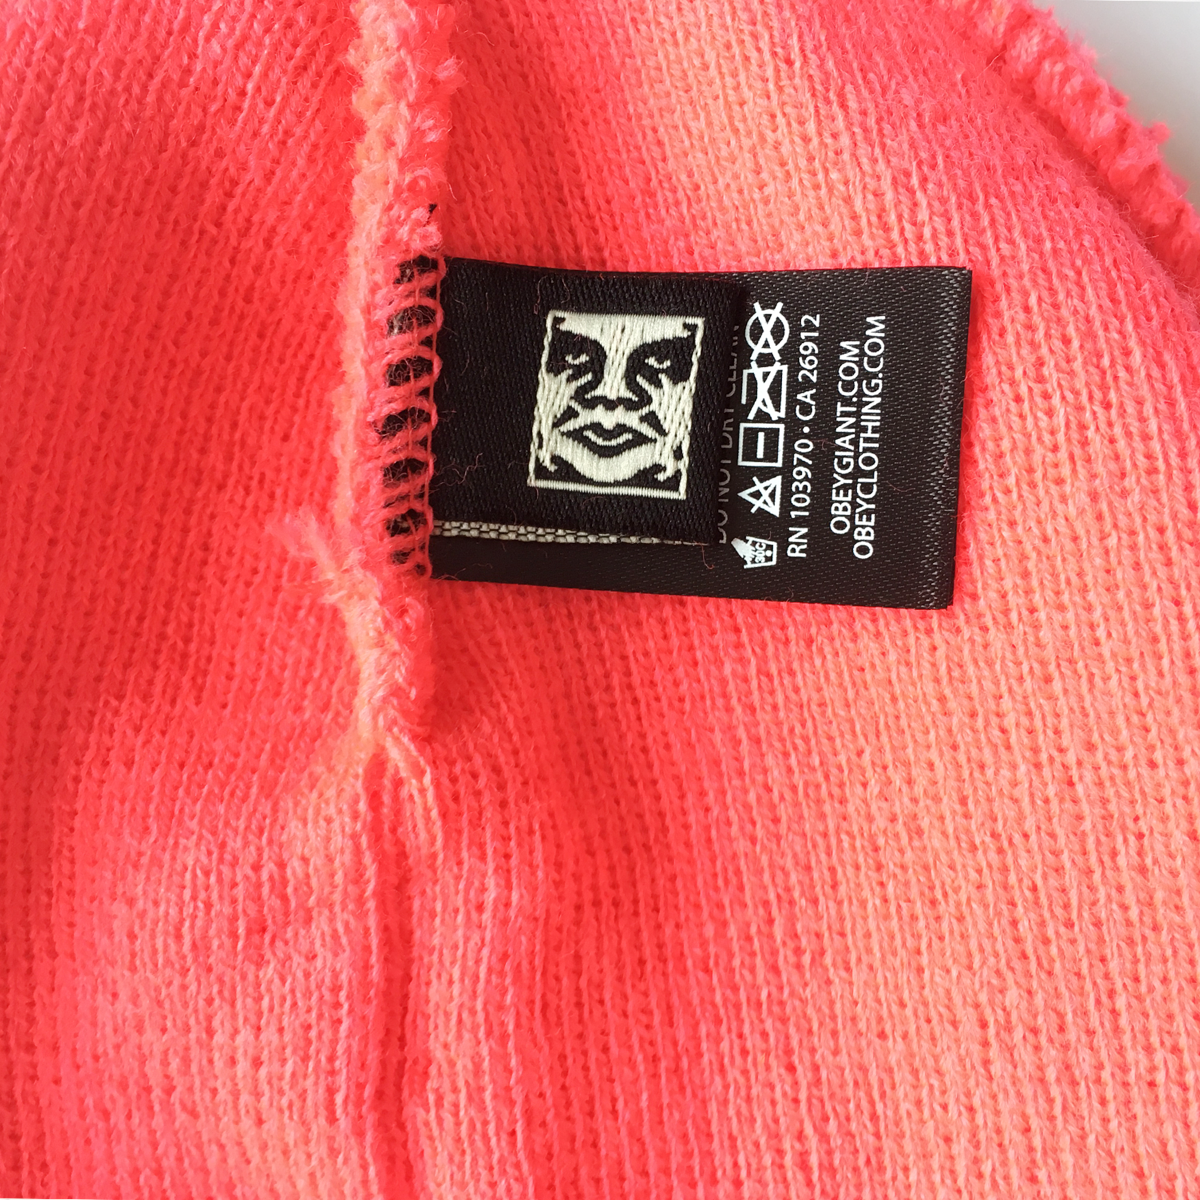 Obey hot pink 5